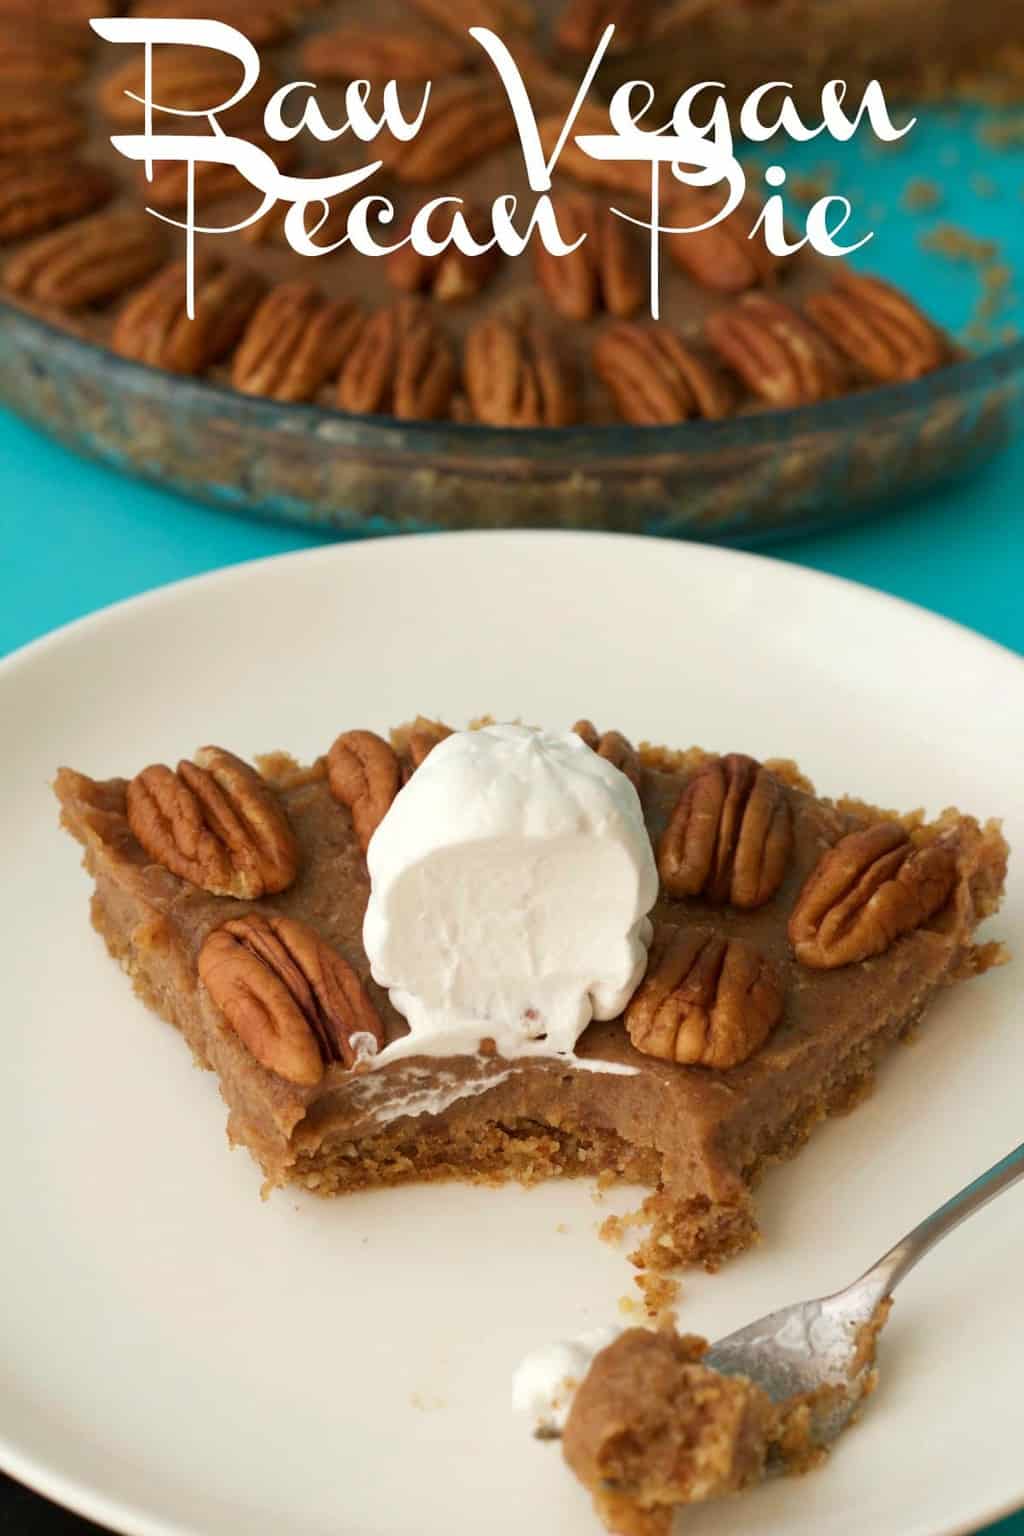 Deliciously raw vegan pecan pie. 3-layers of raw goodness, packed with pecans and pecan flavor, super easy to make. Raw and gluten-free. #vegan #lovingitvegan #glutenfree #raw #dessert